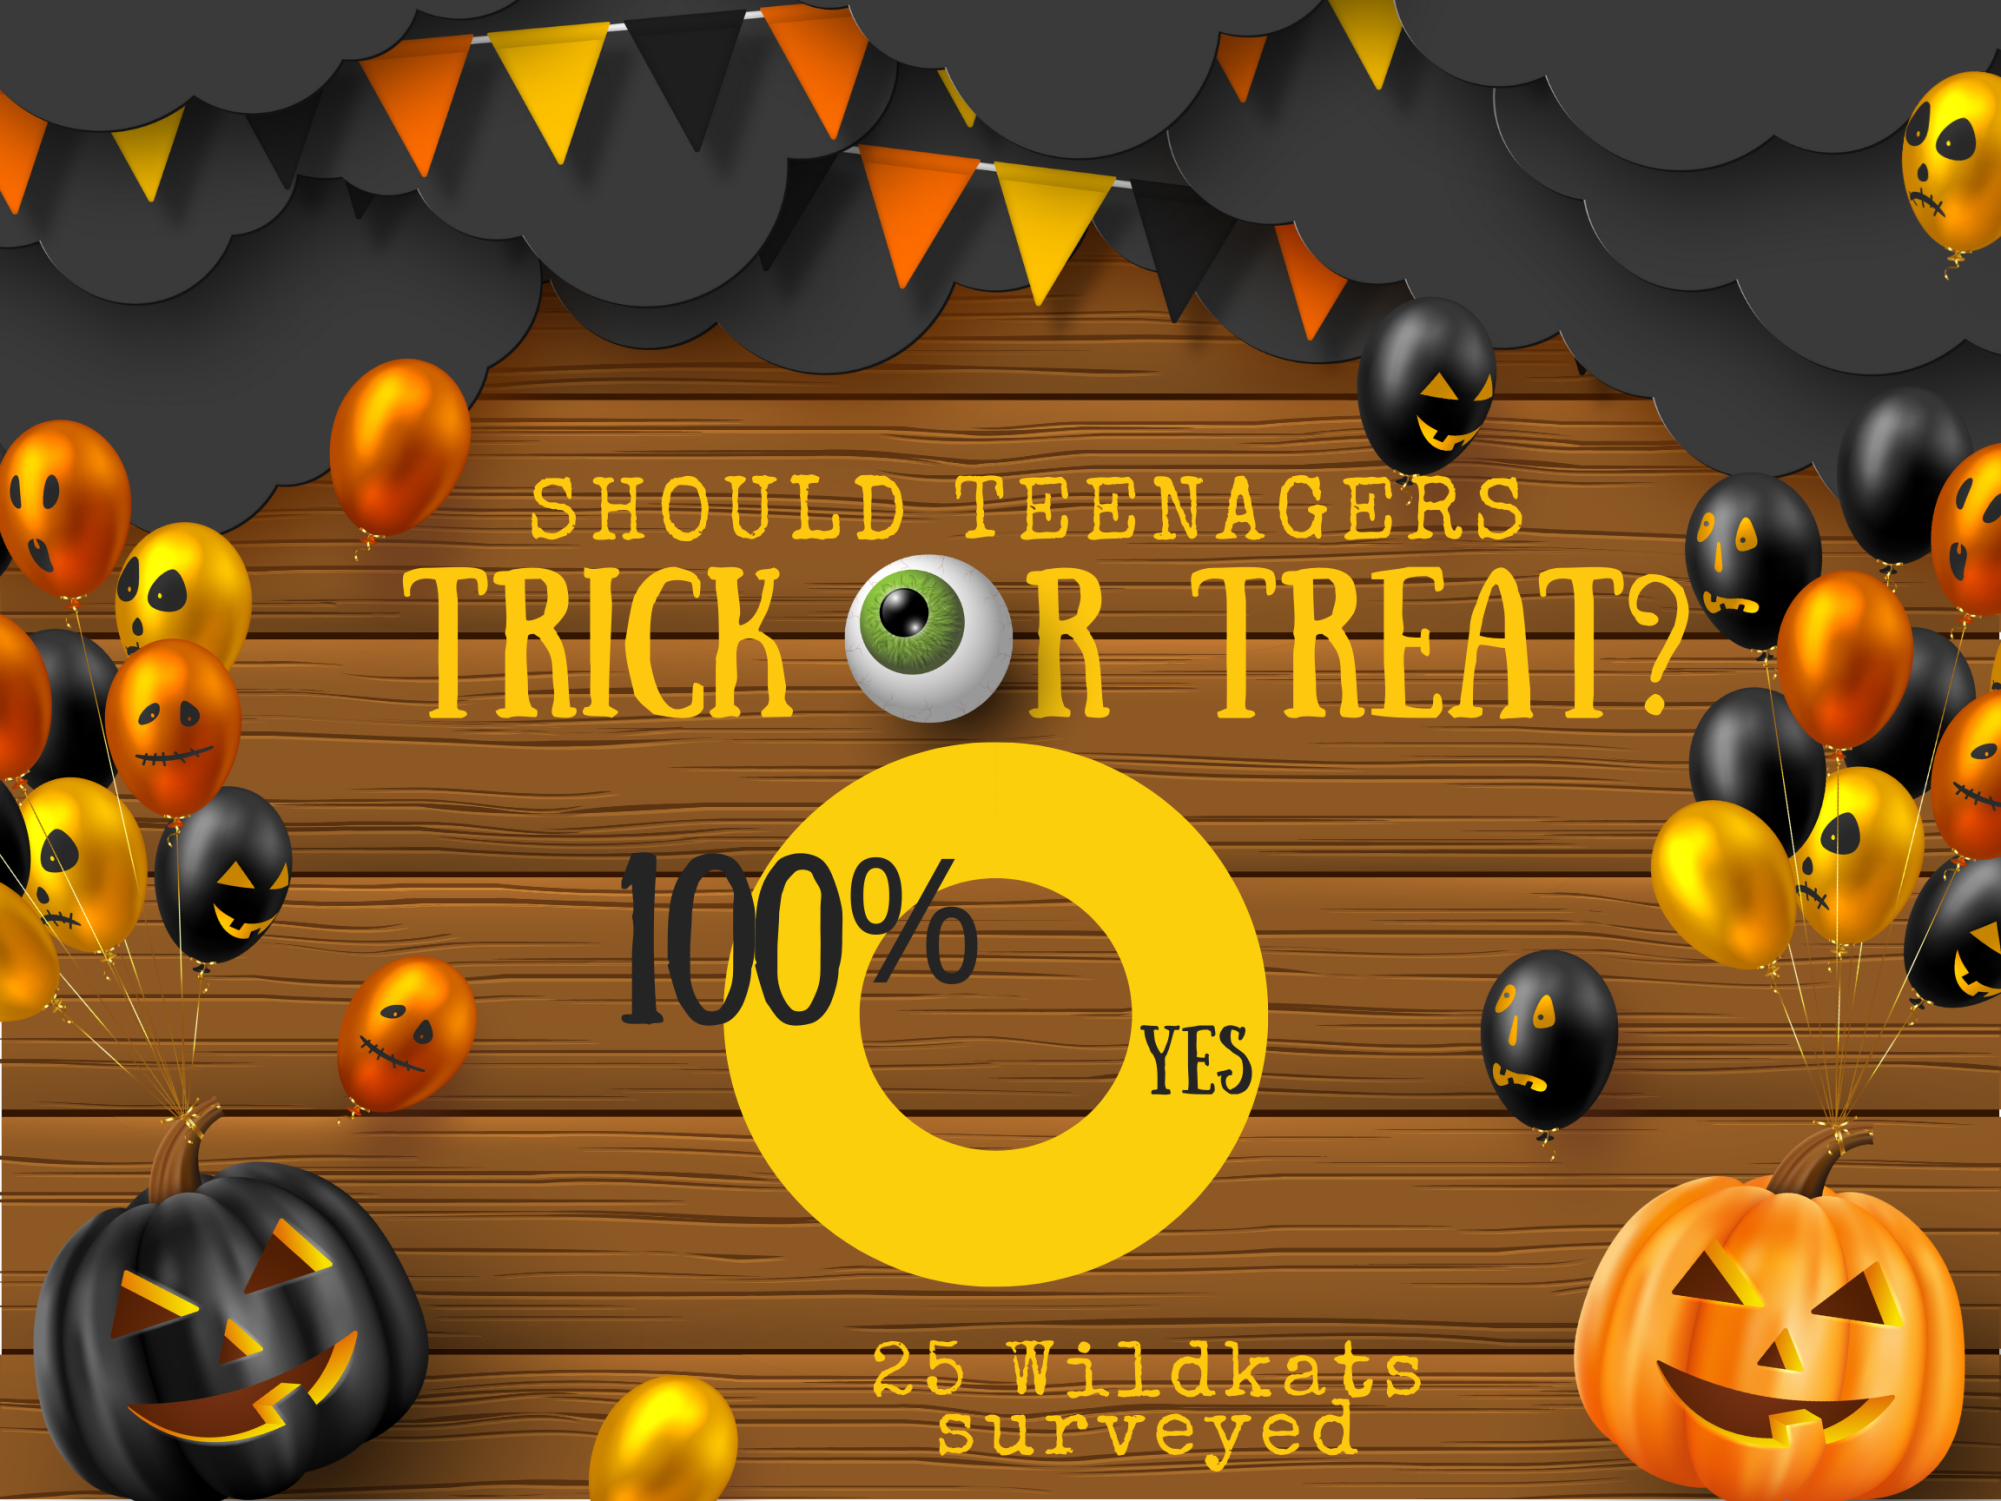 Should teenagers be allowed to trick or treat?